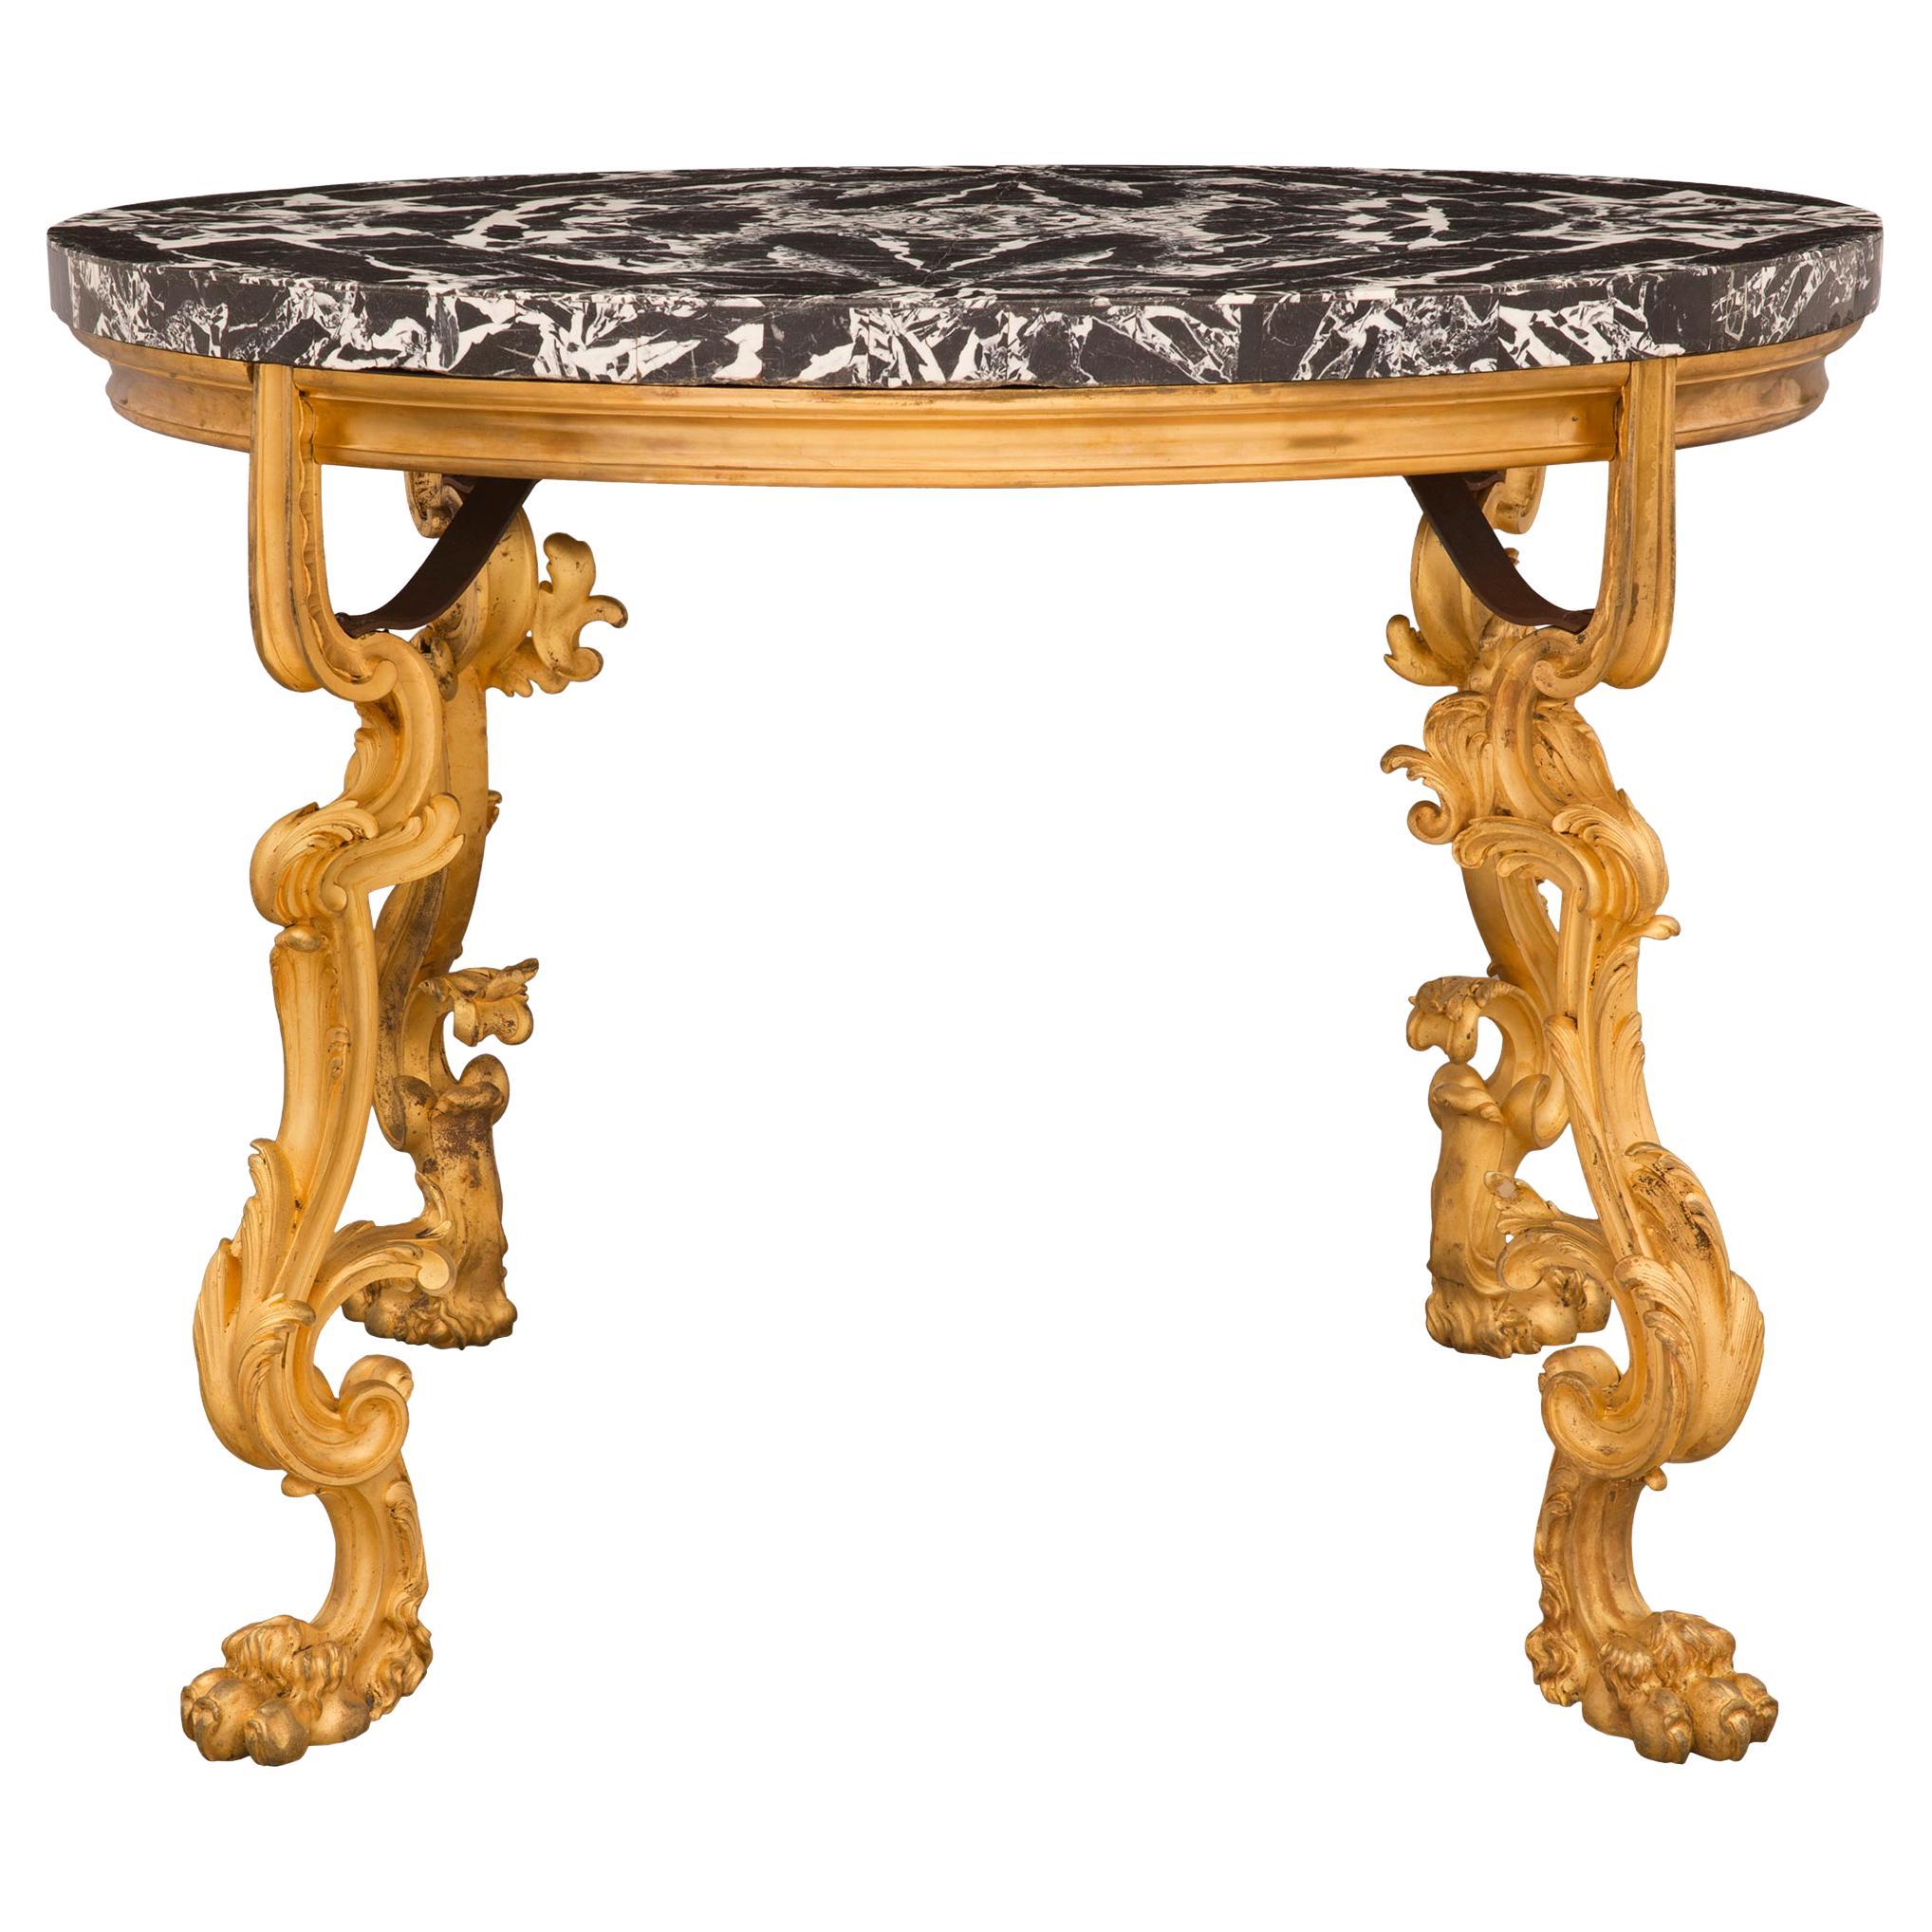 French Mid-19th Century Louis XV Style Oval Center Table